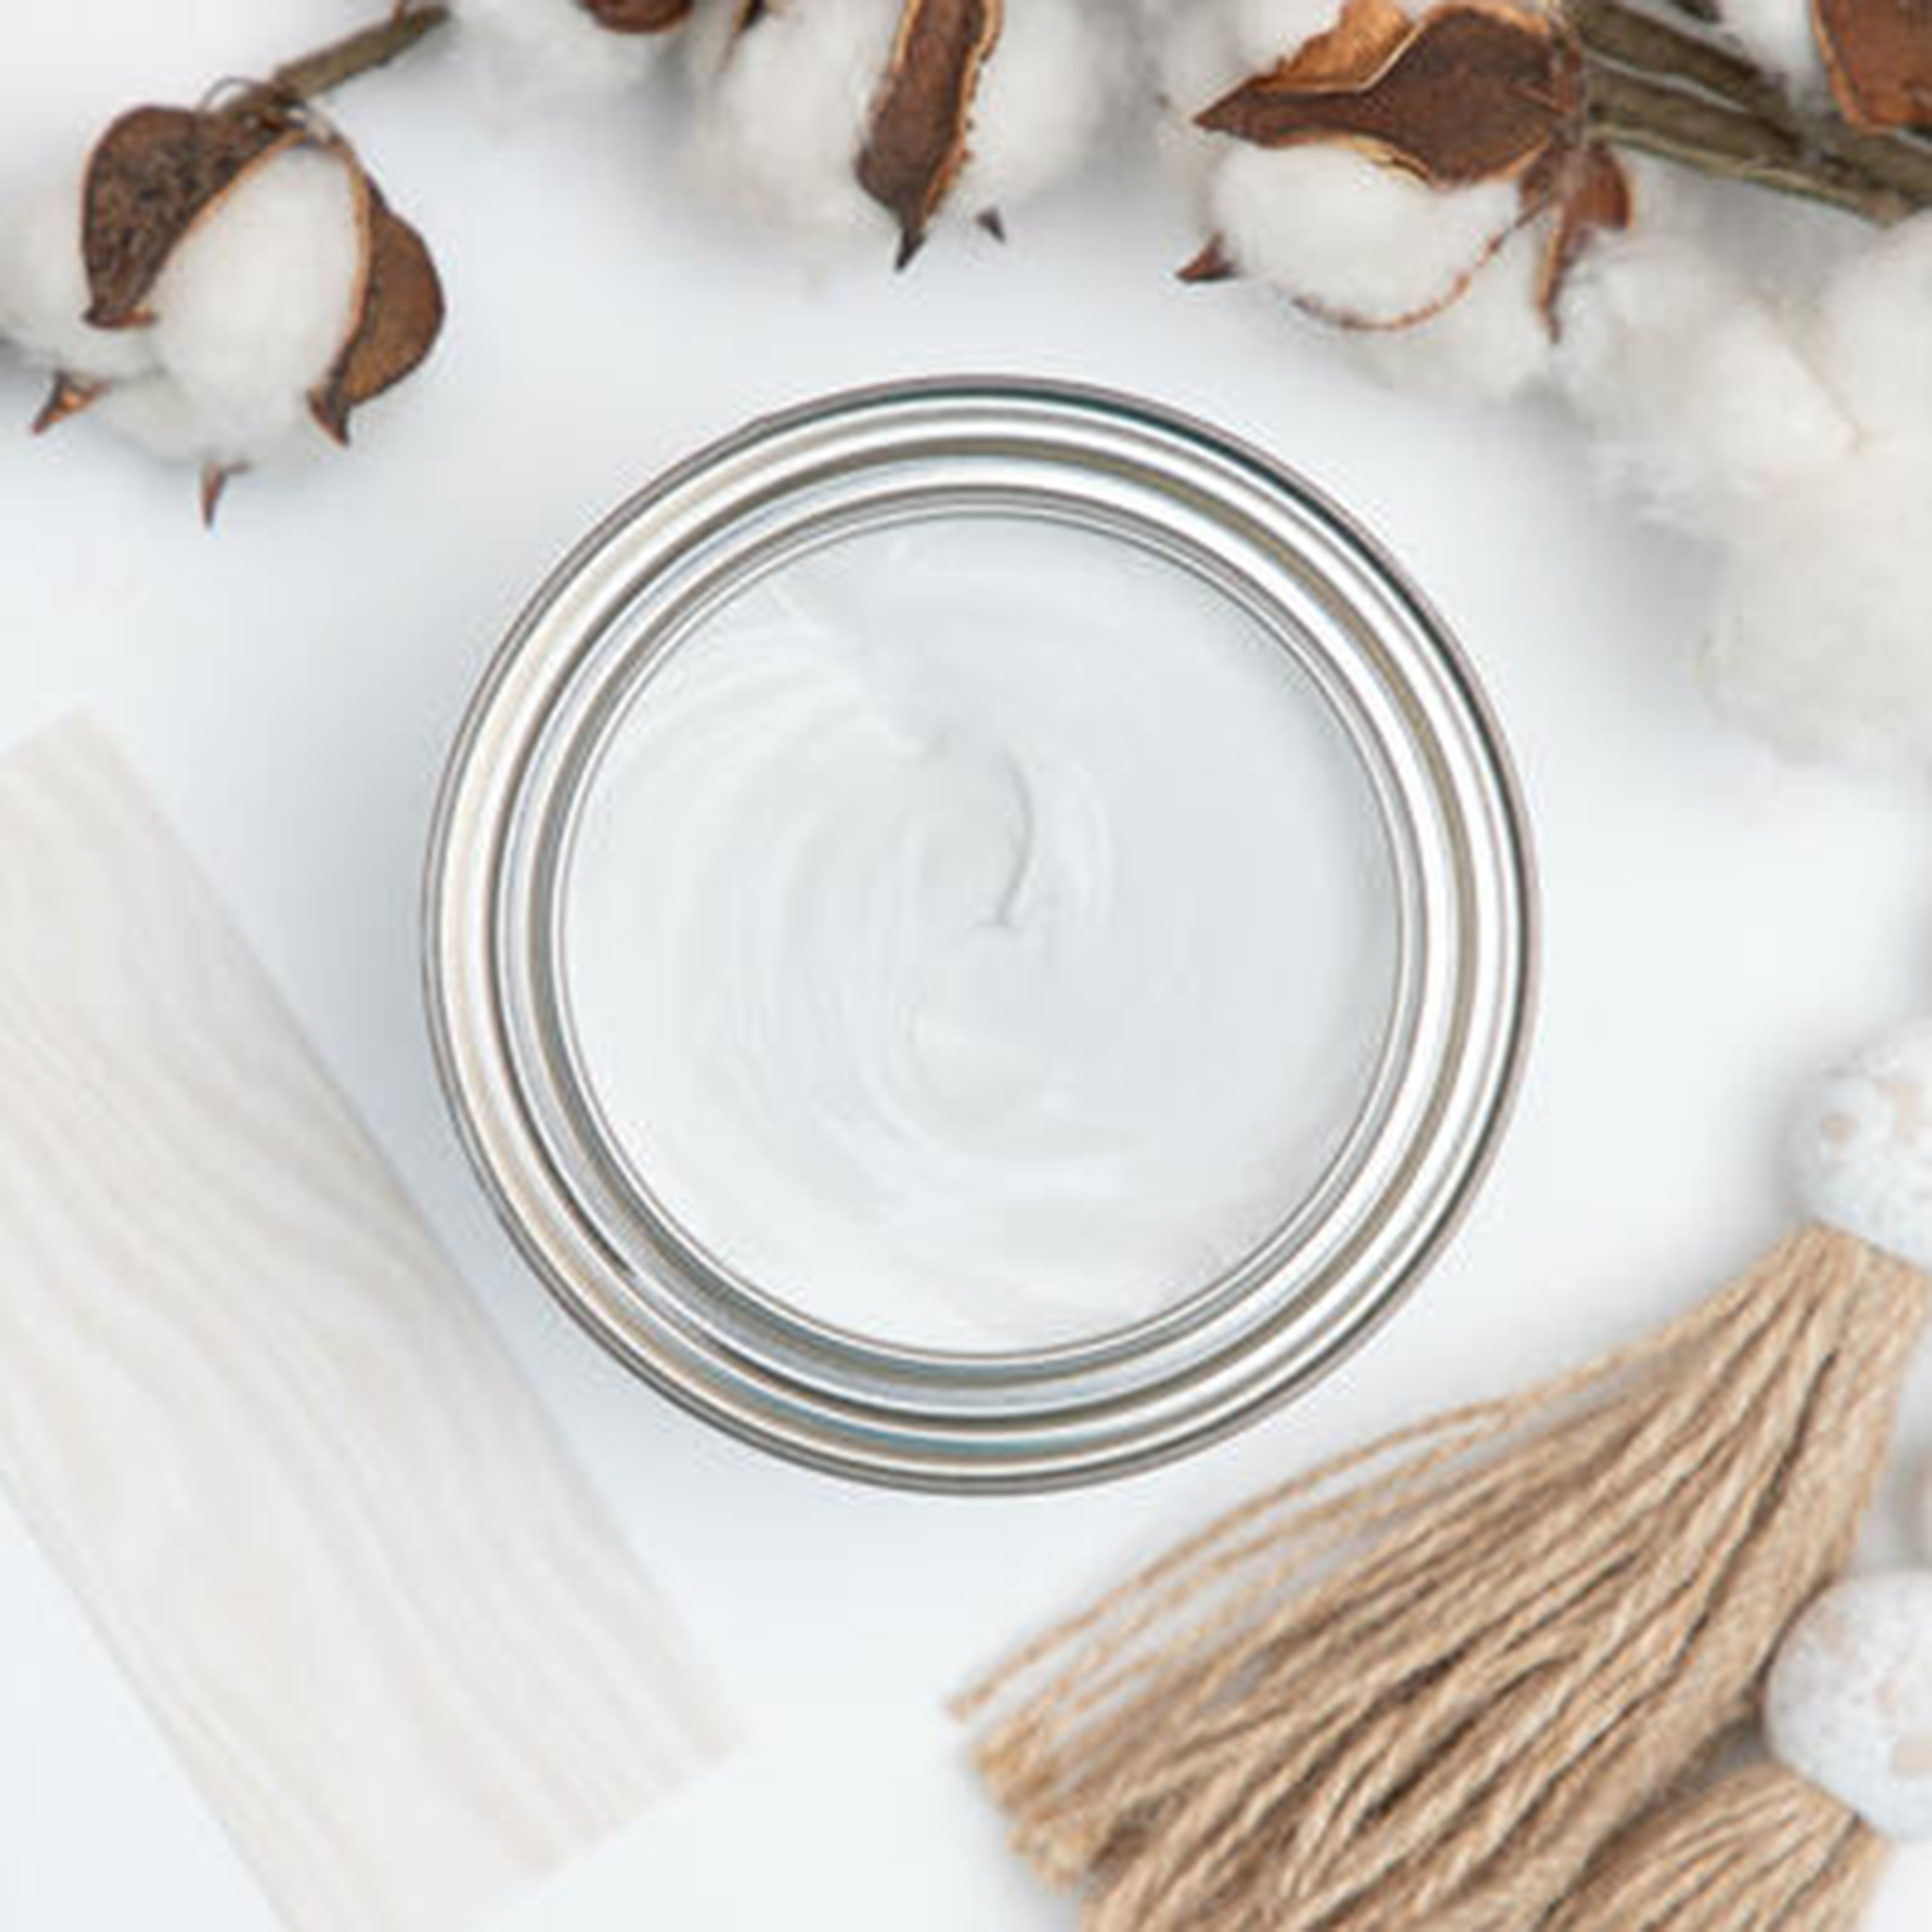 A arial view of an open can of Dixie Belle's No Pain Gel Stain in Picklin White is against a white background. The can is surrounded by twine tassles, real cotton, and a wood swatch featuring the stain color.